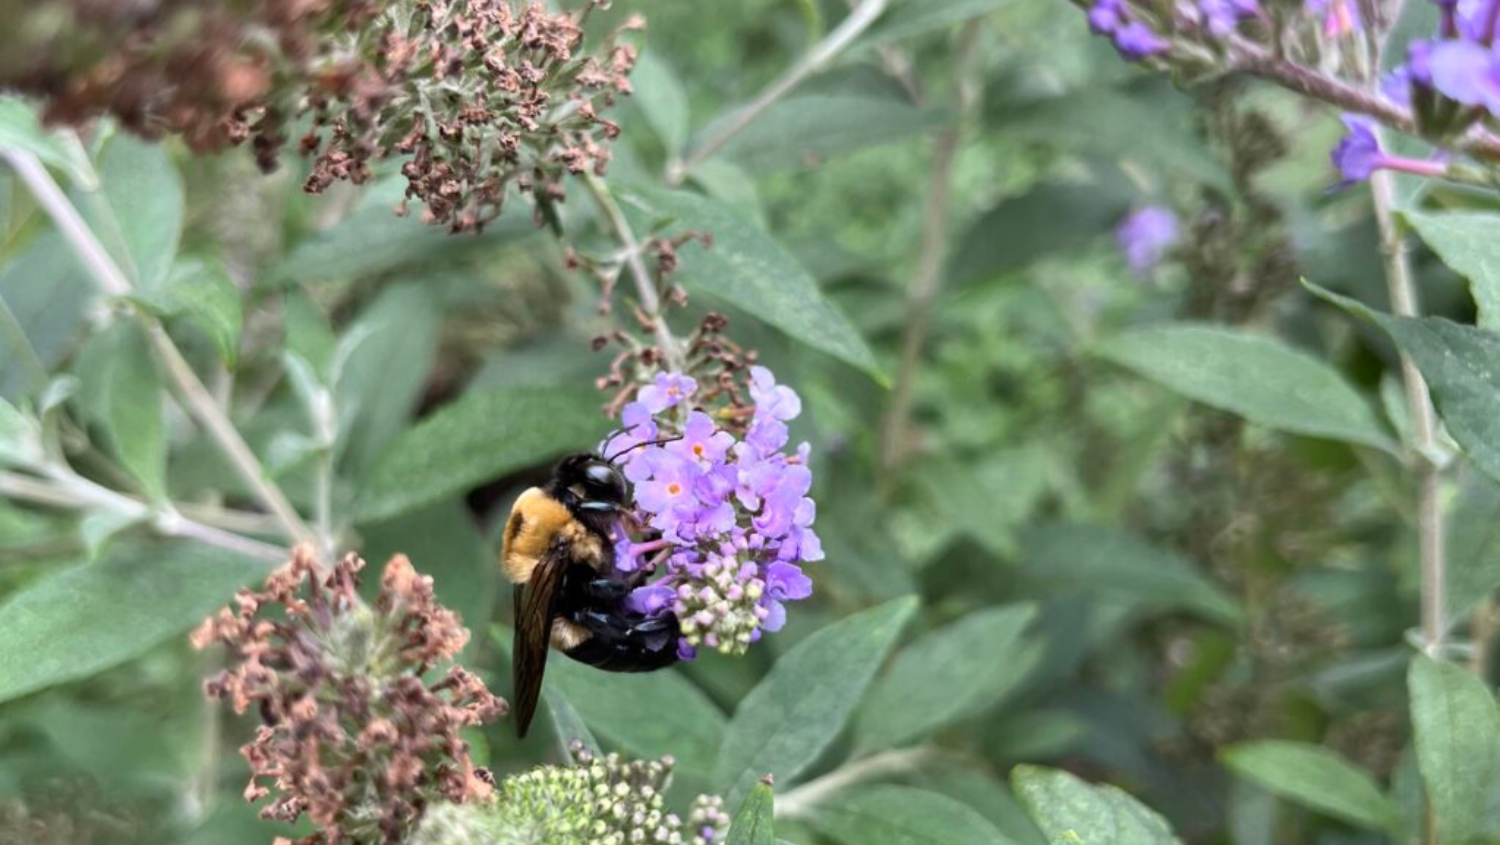 A carpenter bee foraging on Butterfly Bush flowers in a campus Pollinator Garden.